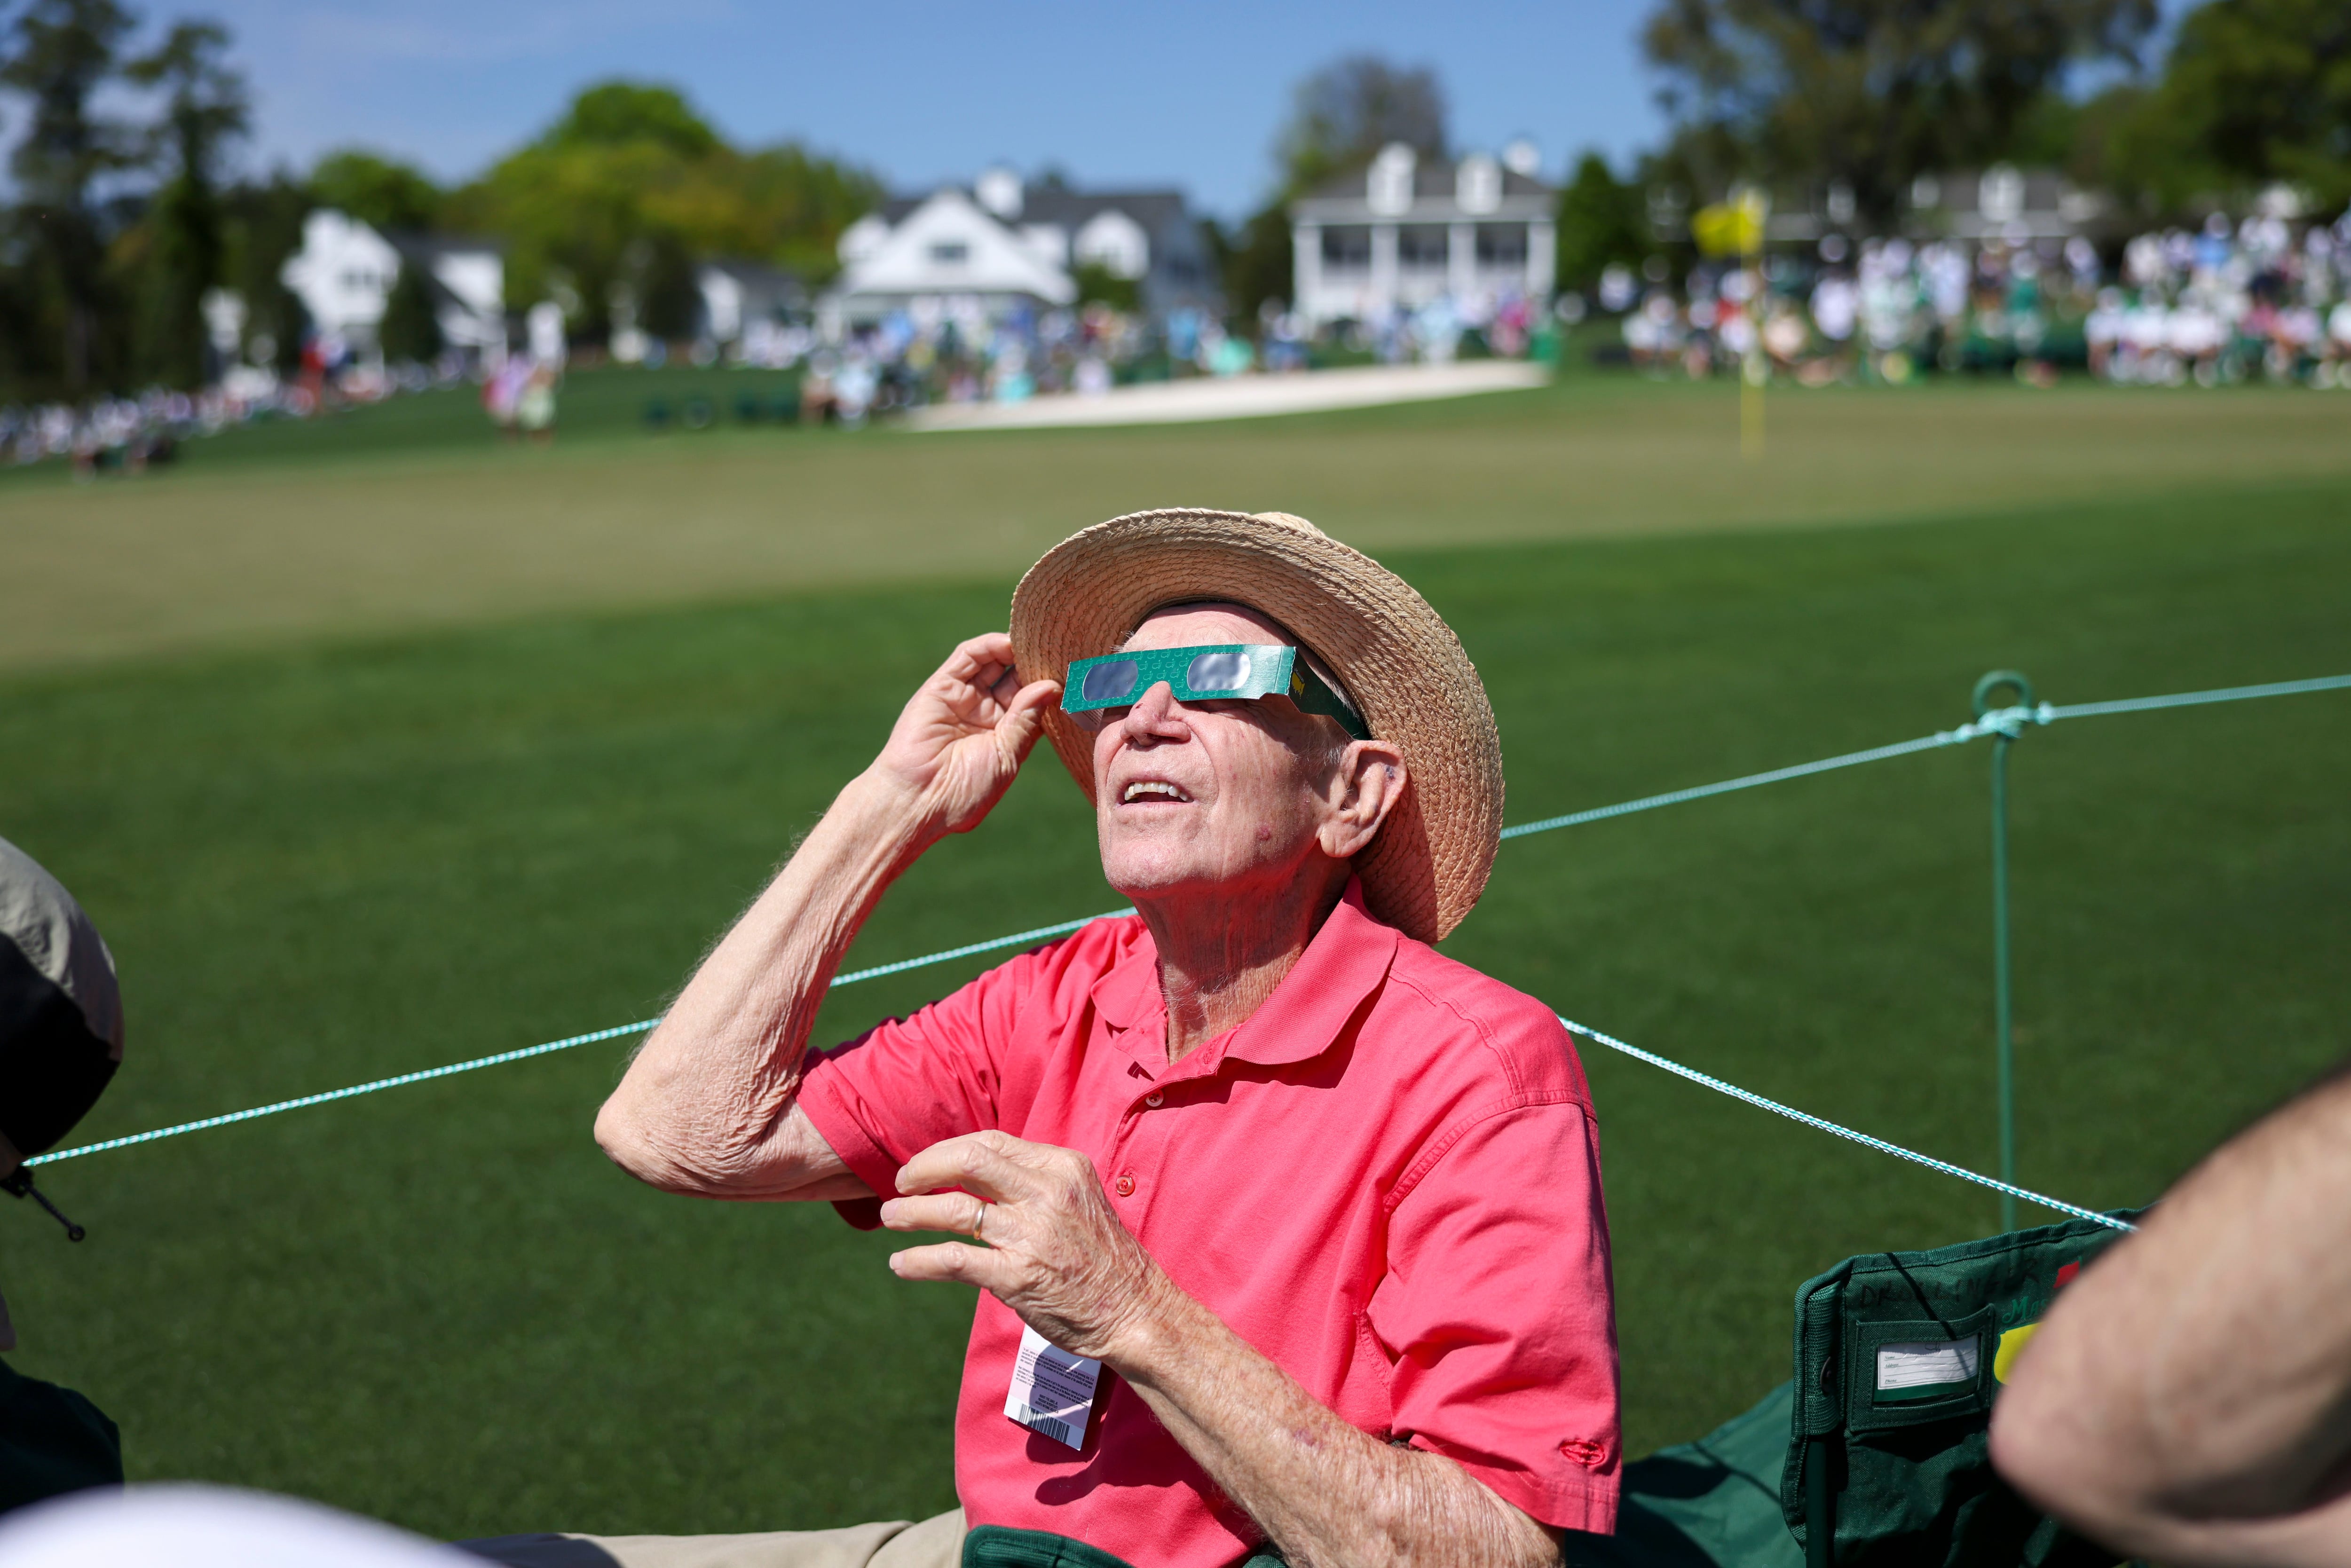 91-year-old Marcus Mooneyhan, of Newport, Tn, uses eclipse glasses to view the solar eclipse on the ninth green during the practice round of the 2024 Masters Tournament at Augusta National Golf Club, Monday, April 8, 2024, in Augusta, Ga. (Jason Getz / jason.getz@ajc.com)